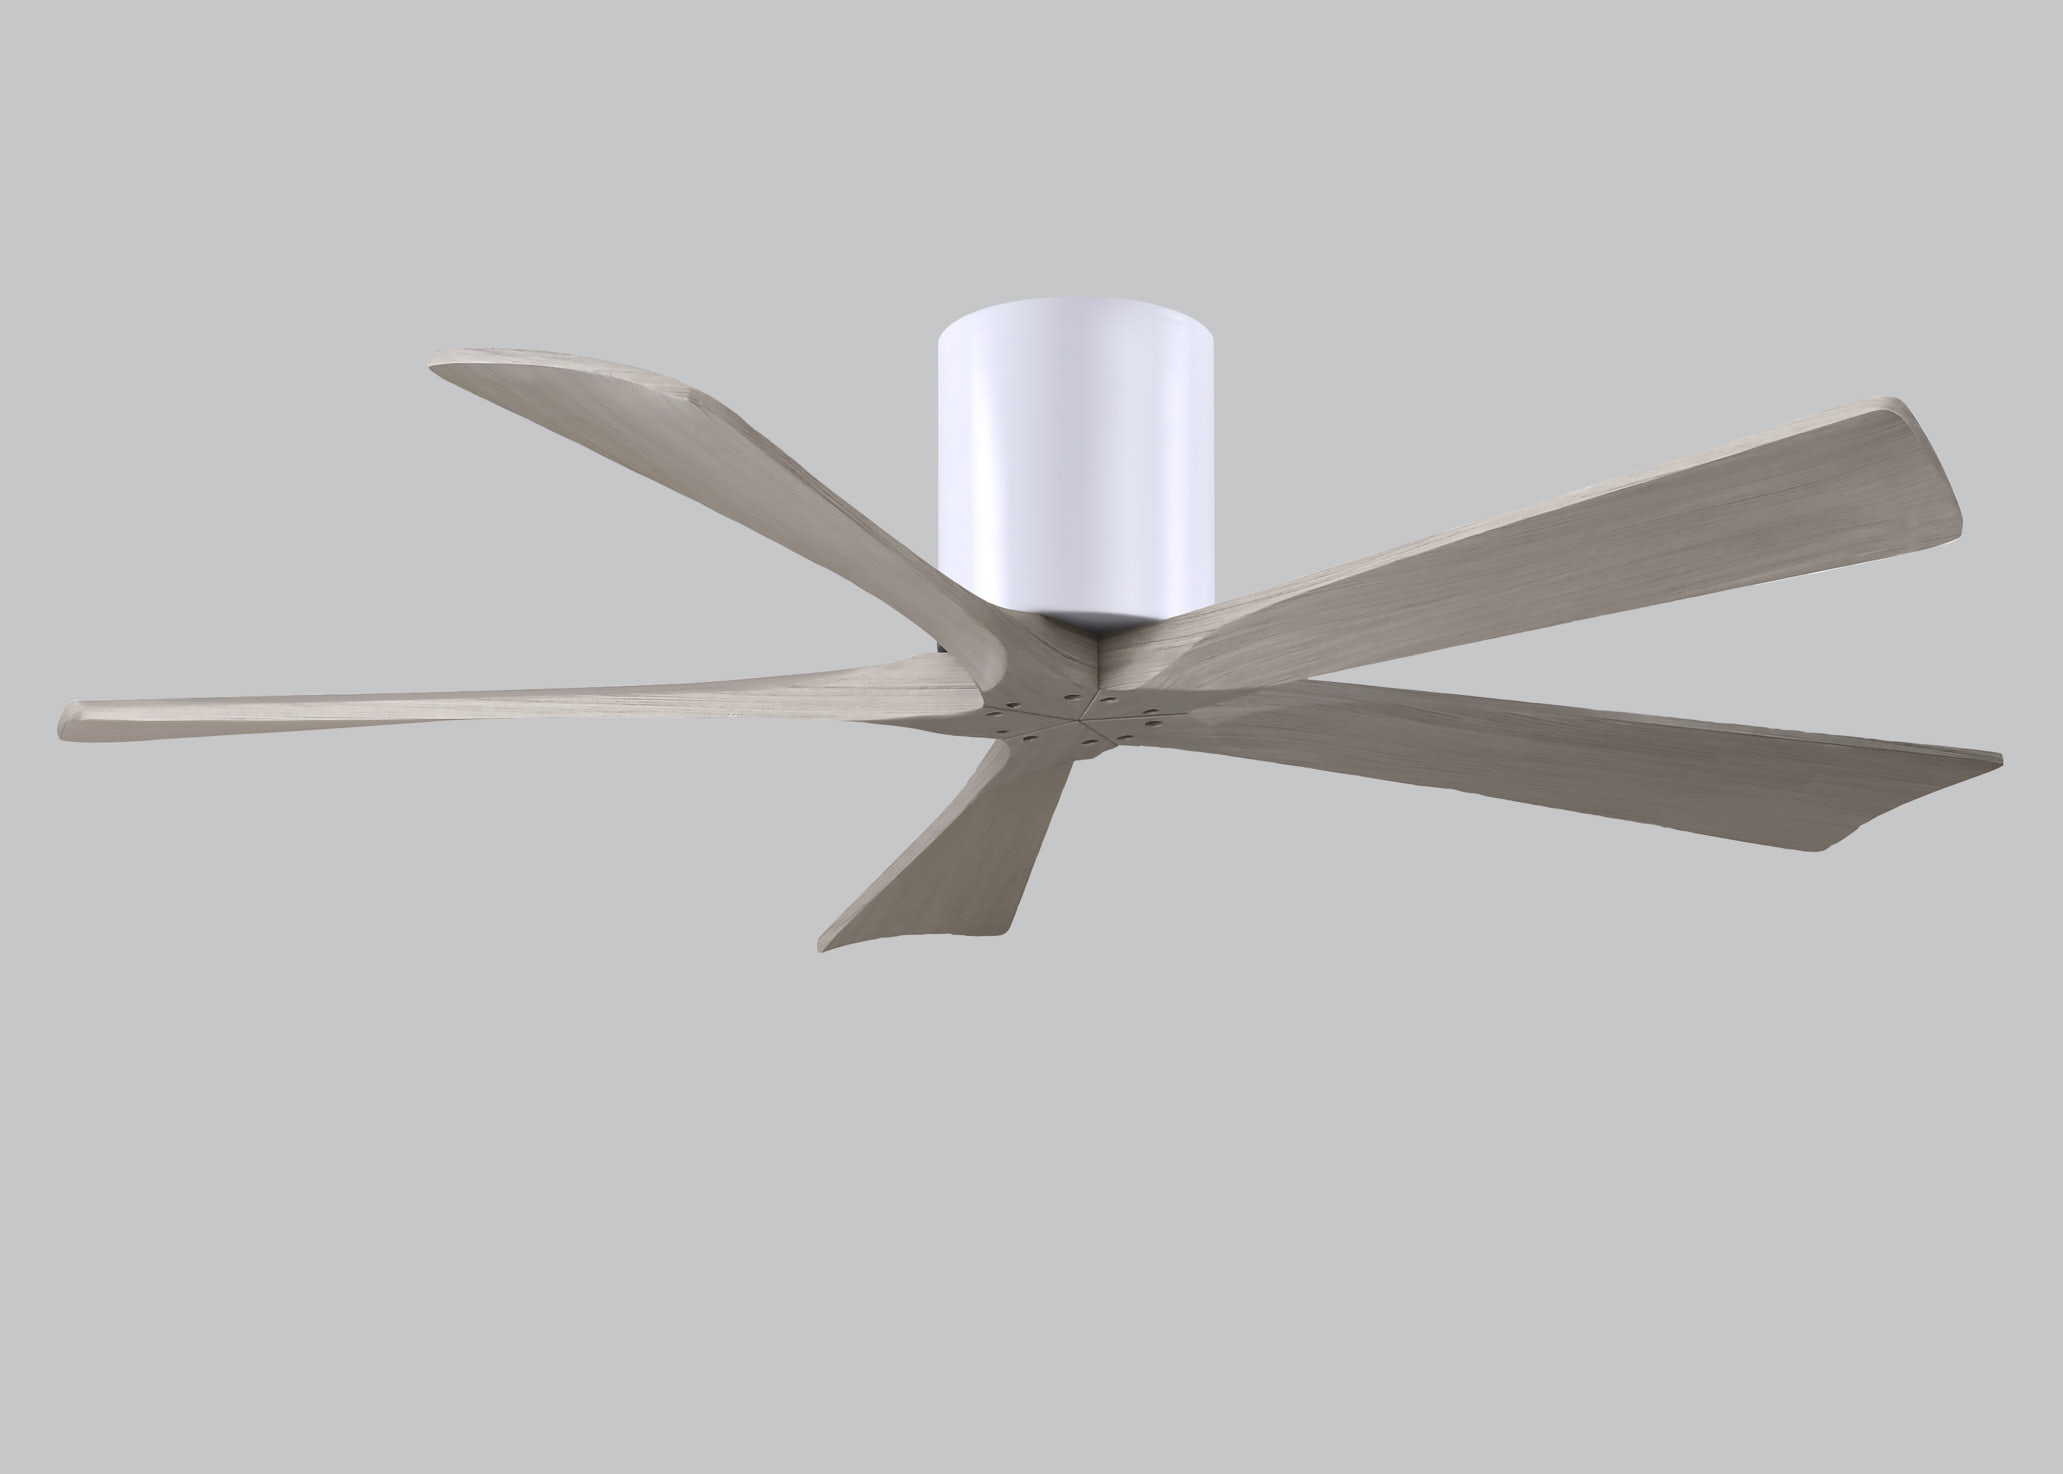 Irene-5H 6-speed ceiling fan in gloss white finish with 52